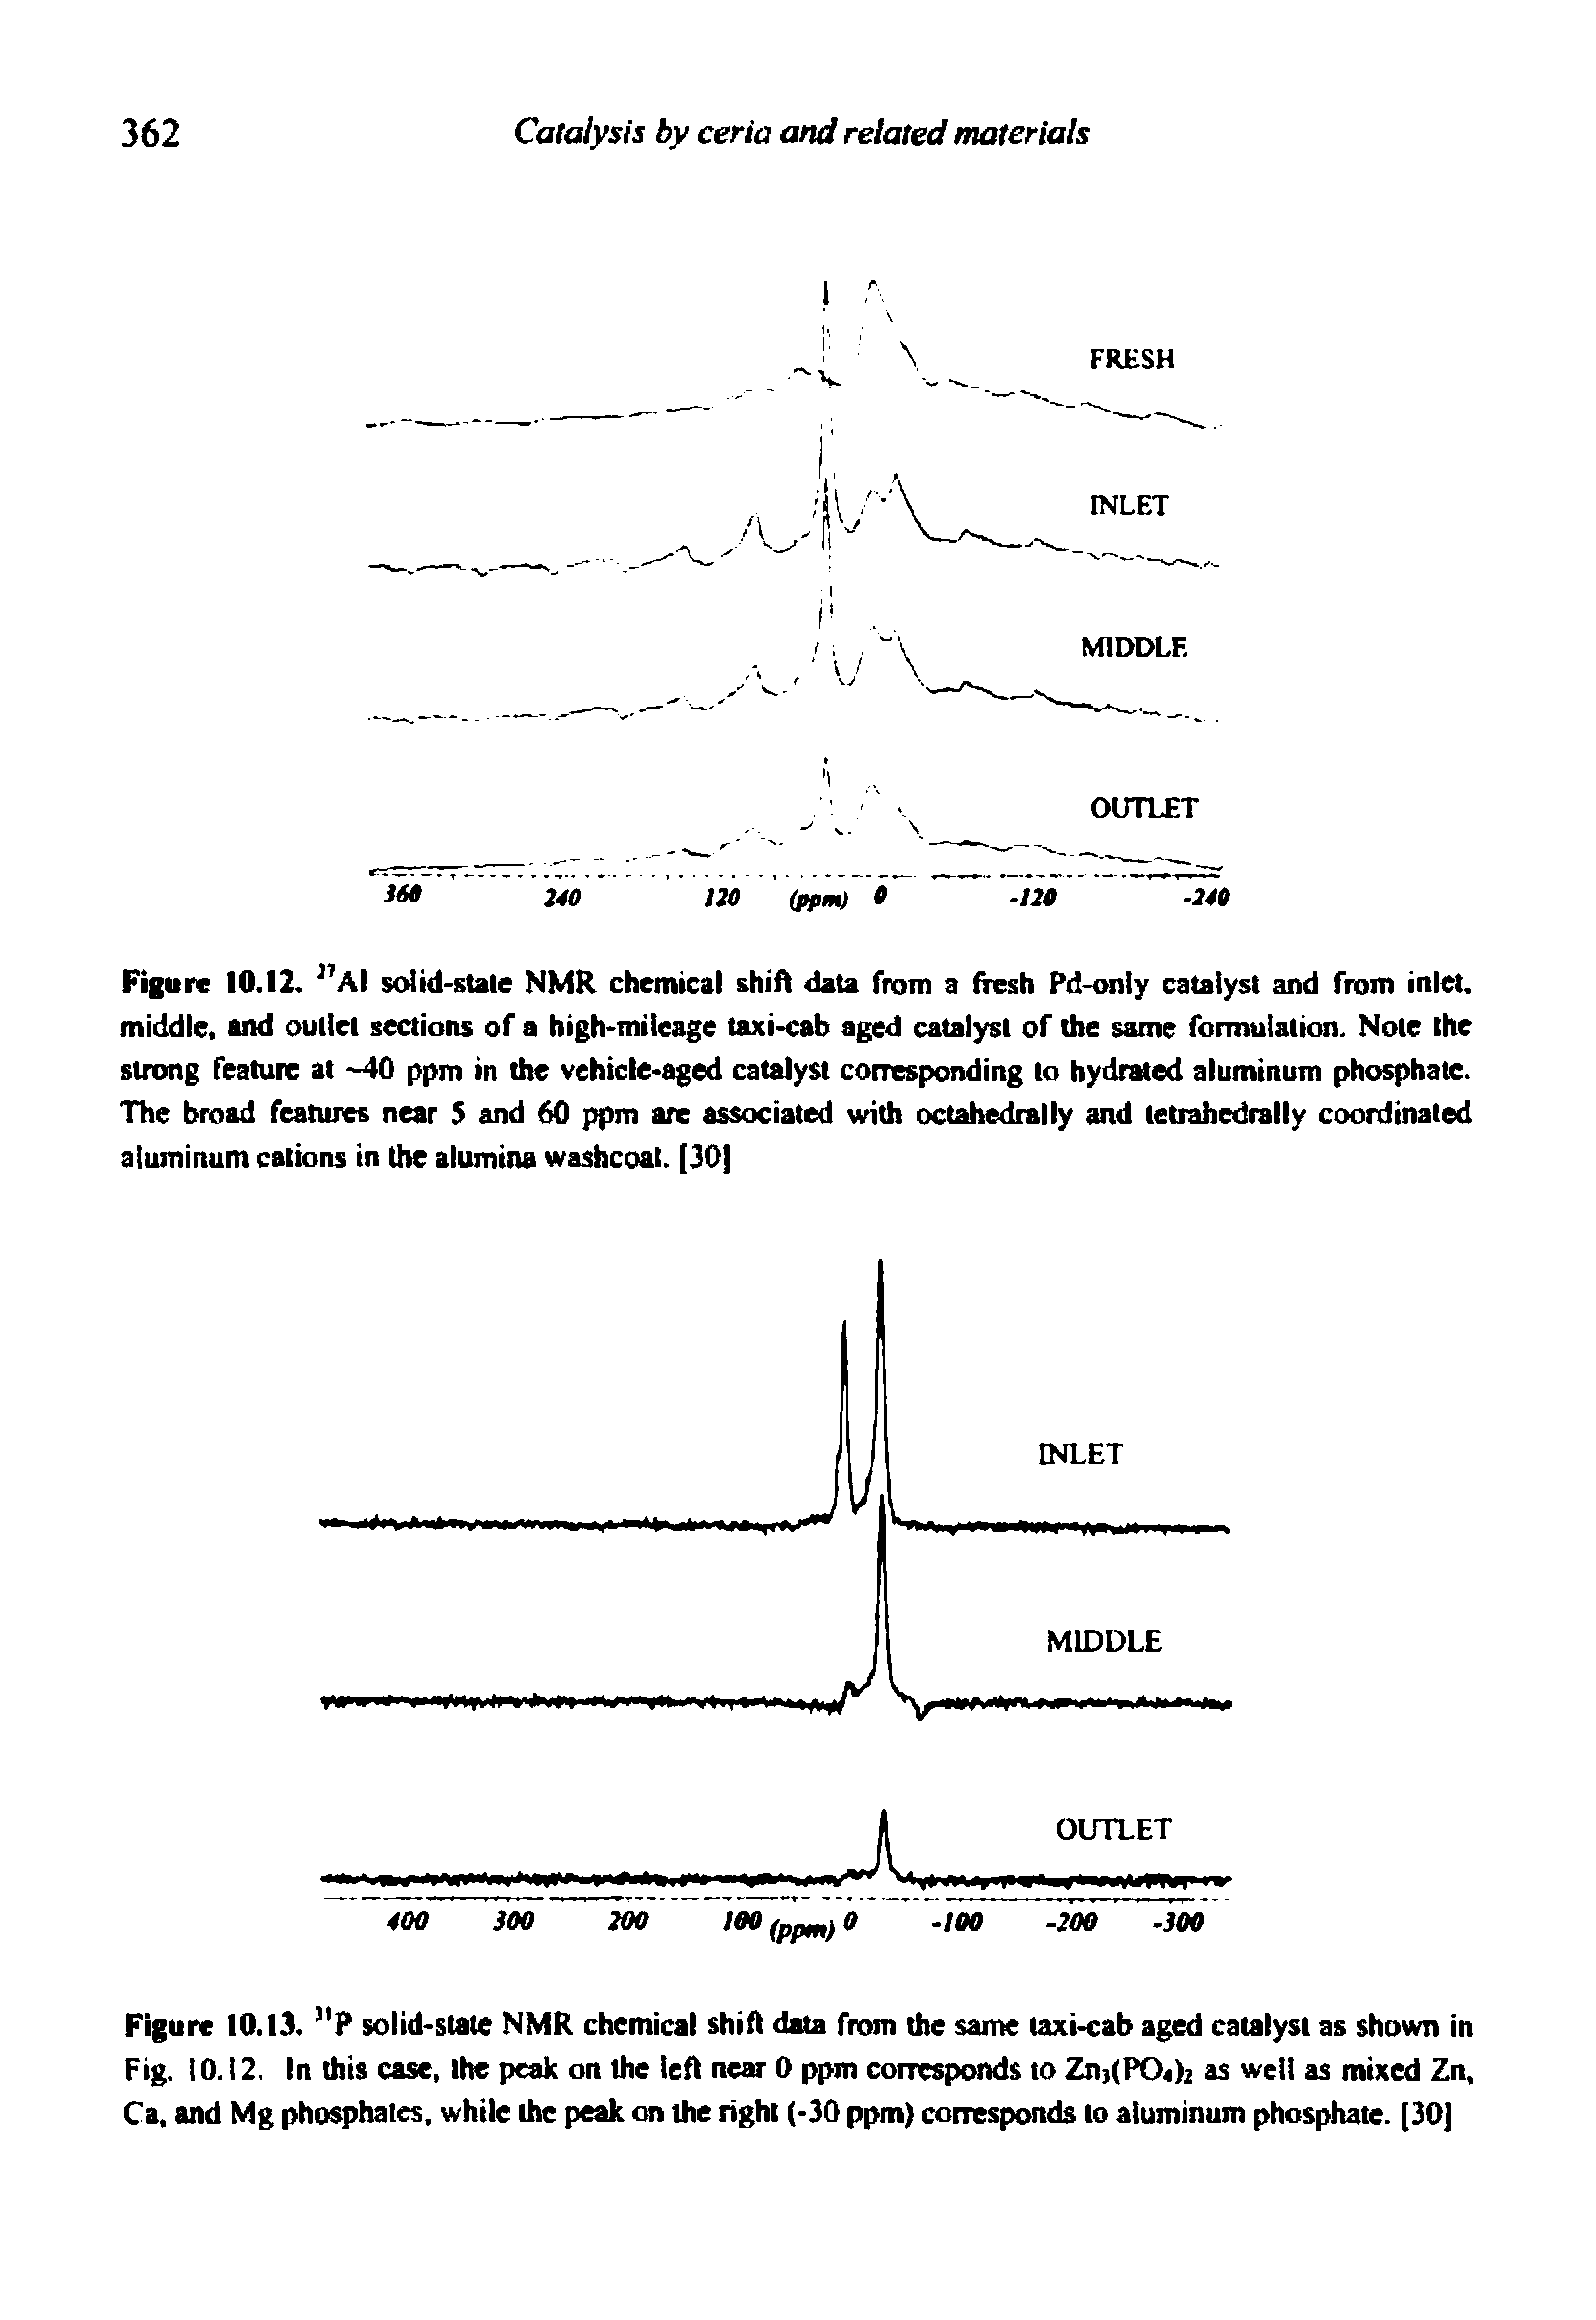 Figure 10.13. solid-state NMR chemical shift data from the same taxi-cab aged catalyst as shown in Fig. 10.12. In this case, the peak on the left near 0 ppm corresponds to Zn3(P04)2 as well as mixed Zn, Ca, and Mg phosphates, while the peak on the right (-30 ppm) corresponds to aluminum phosphate. [30]...